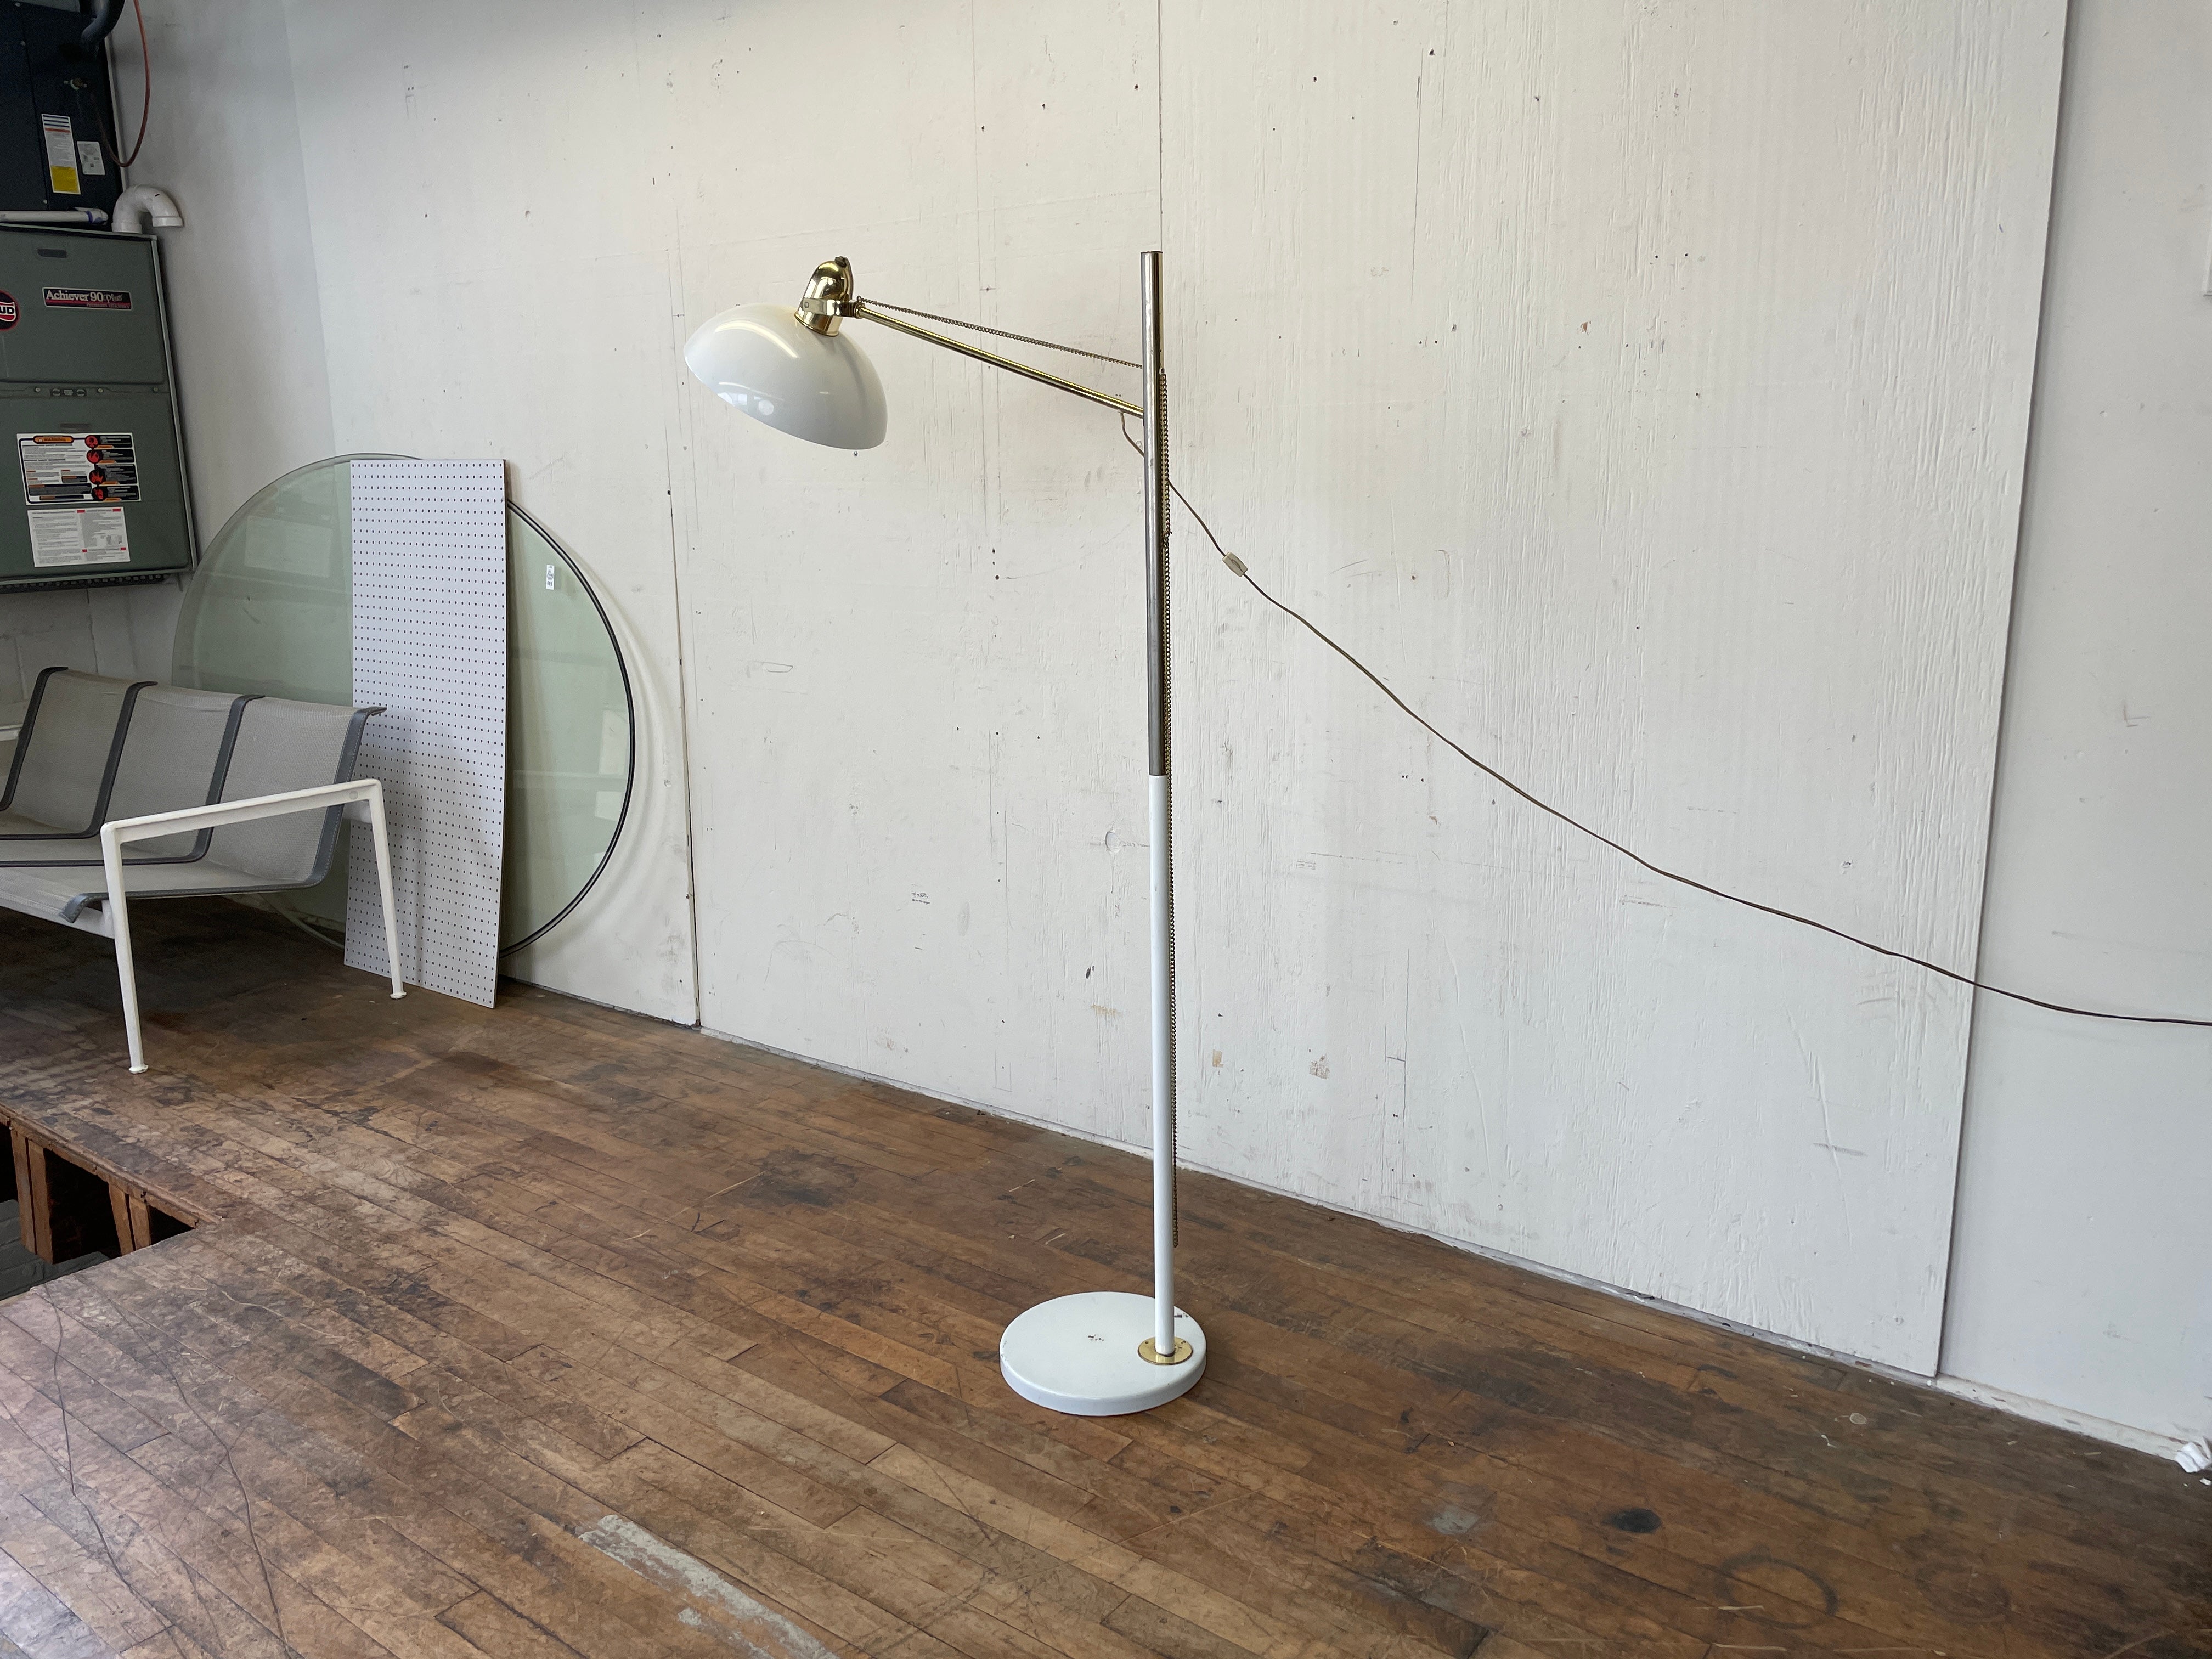 A stunning vintage floor lamp with an adjustable cantilevered design and enameled metal frame. A brass chain connects to the shade and allows the lamp head to be raised or lowered. Good vintage condition with no significant damage. Wiring is sound.